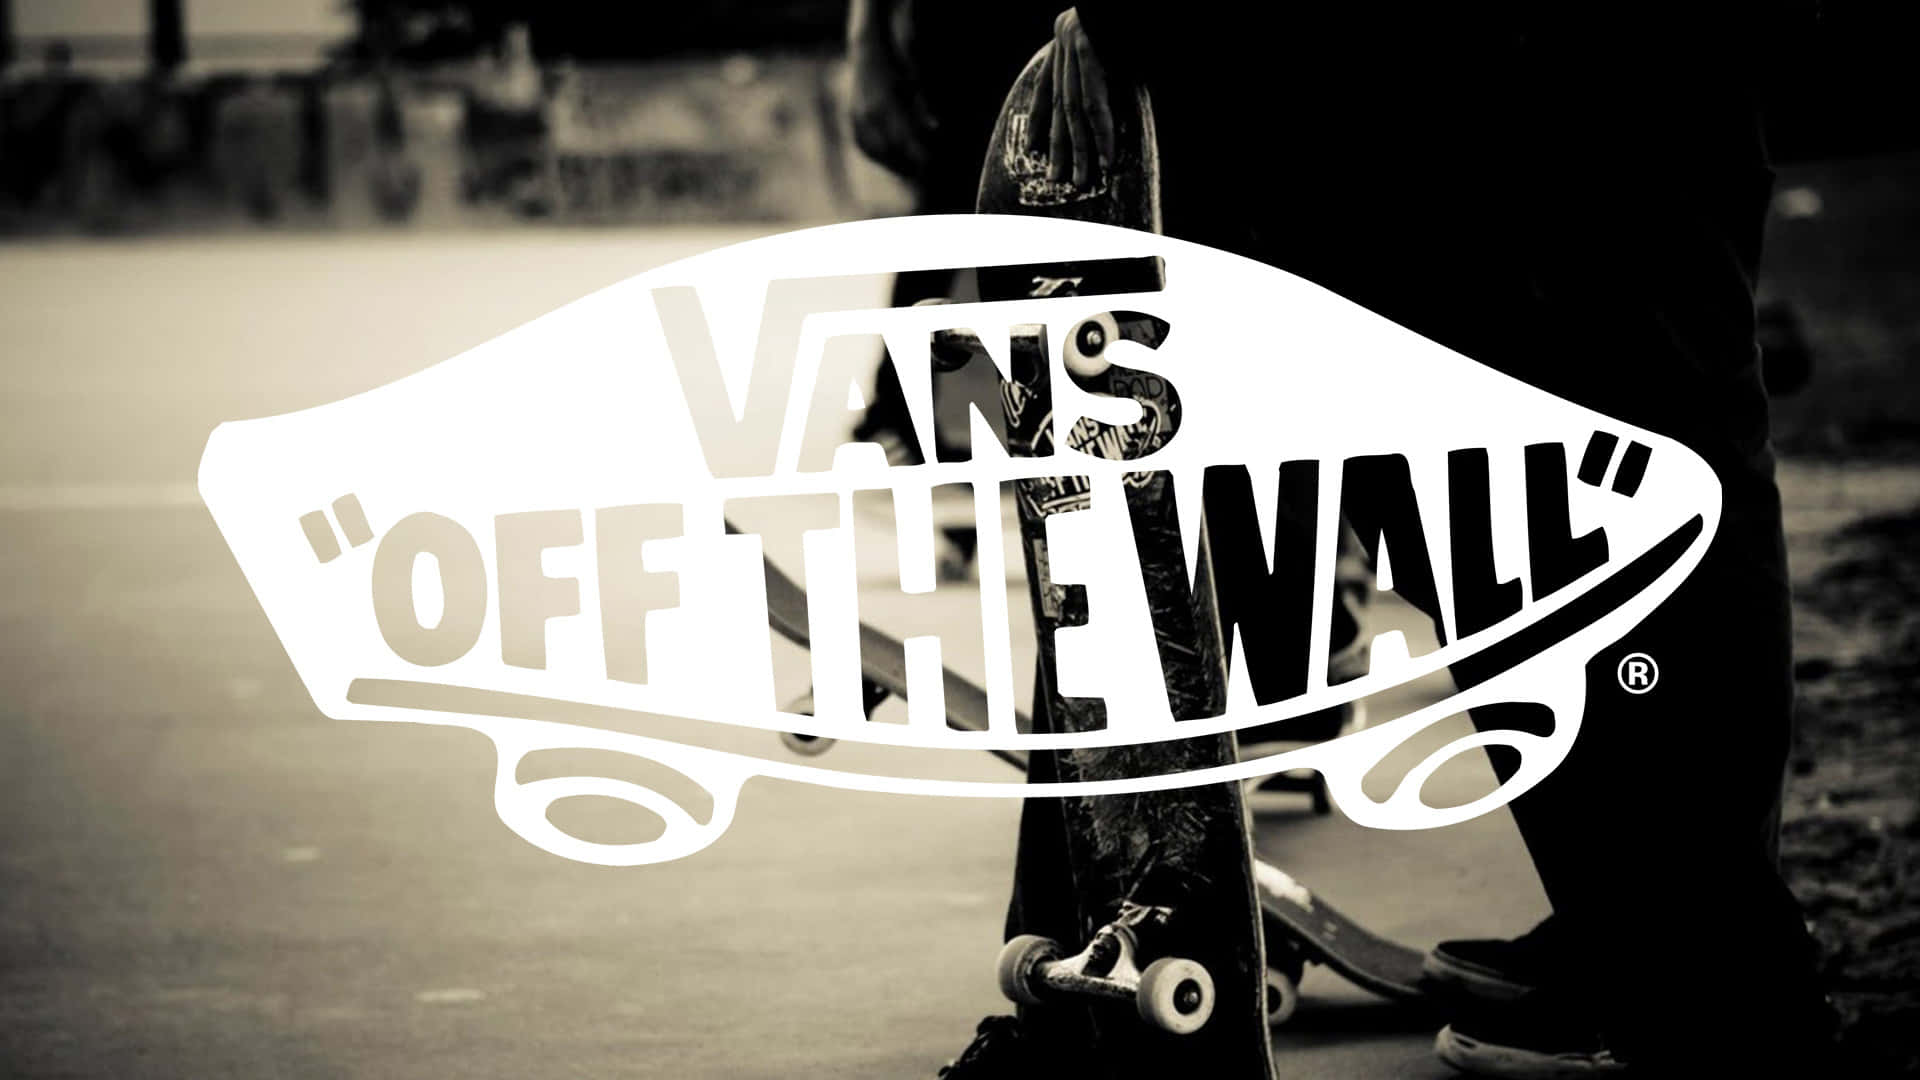 The iconic and recognizable Cool Vans Logo Wallpaper